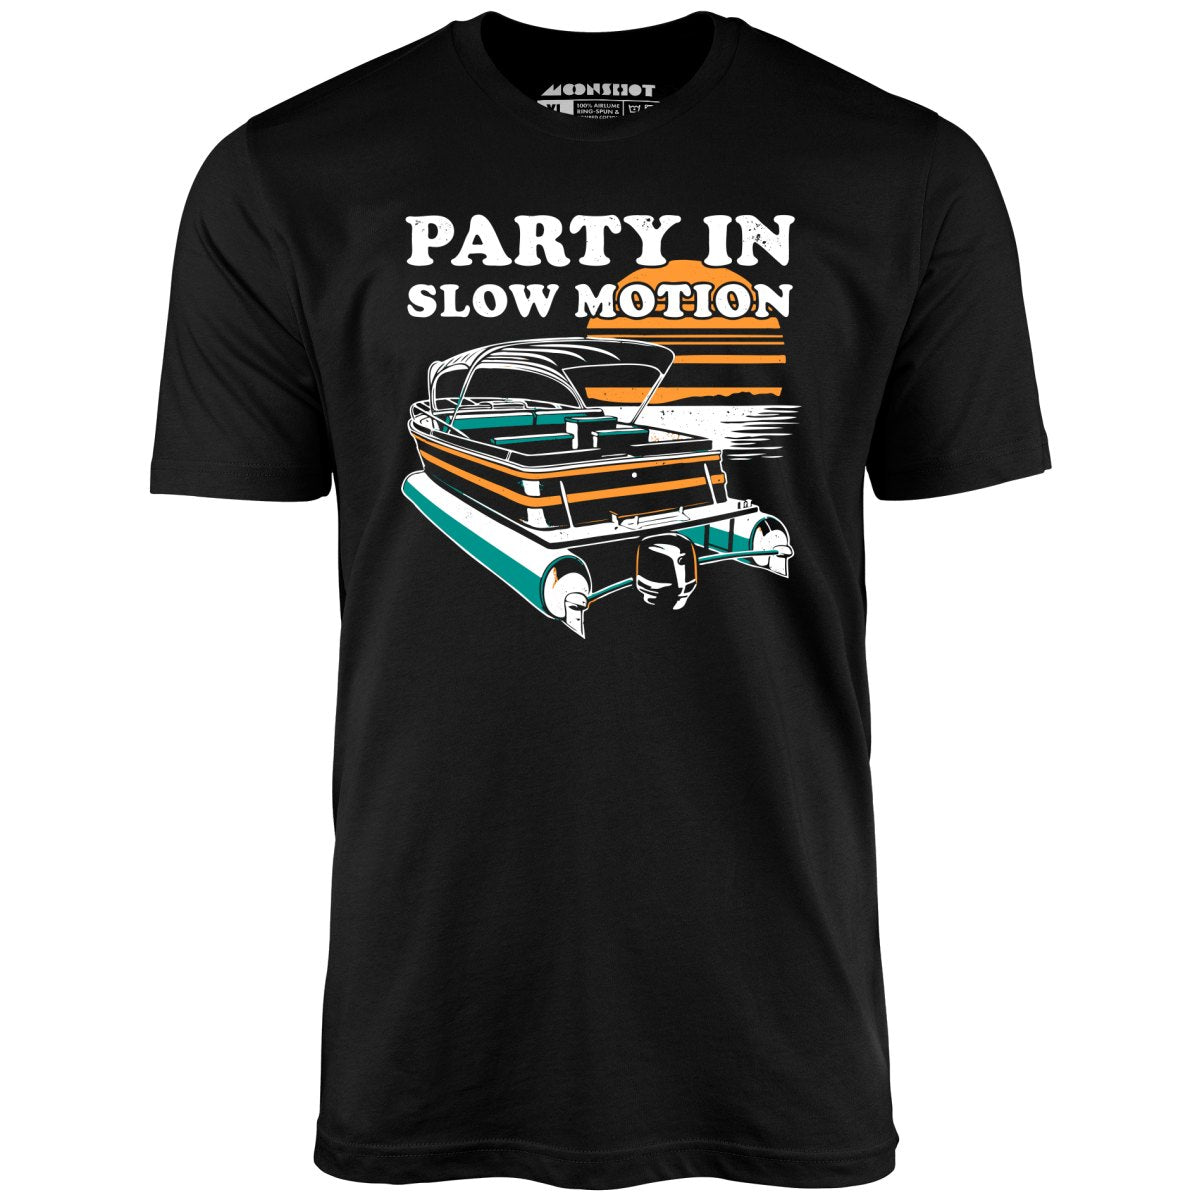 Party in Slow Motion - Unisex T-Shirt